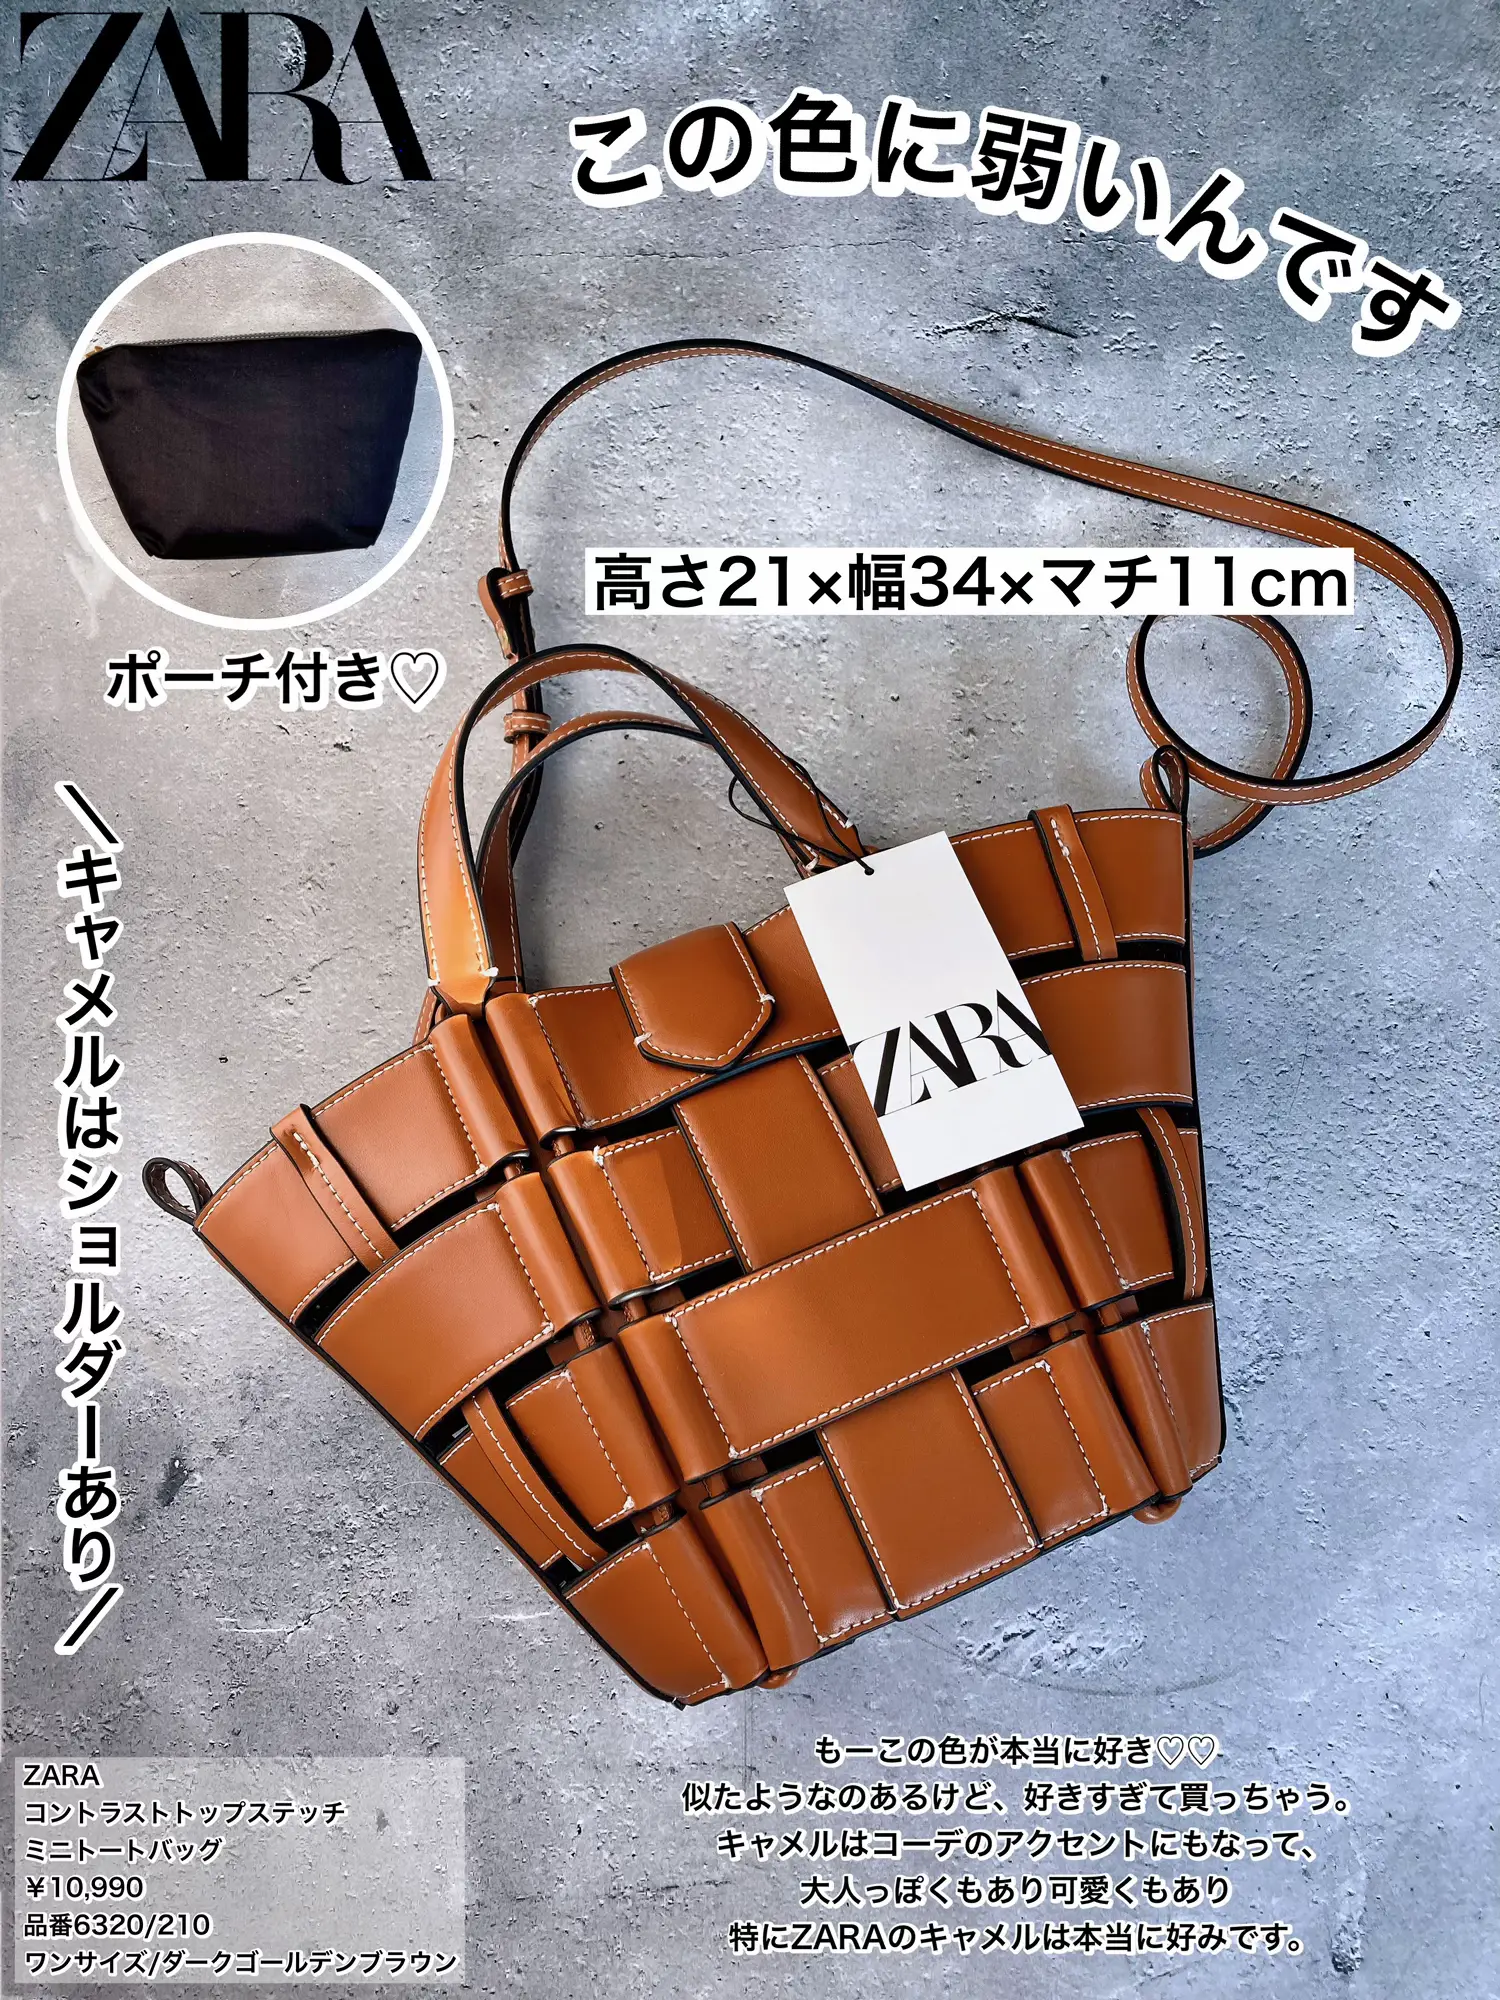 TRENDY ZARA BAGS, Gallery posted by Valeria Redher